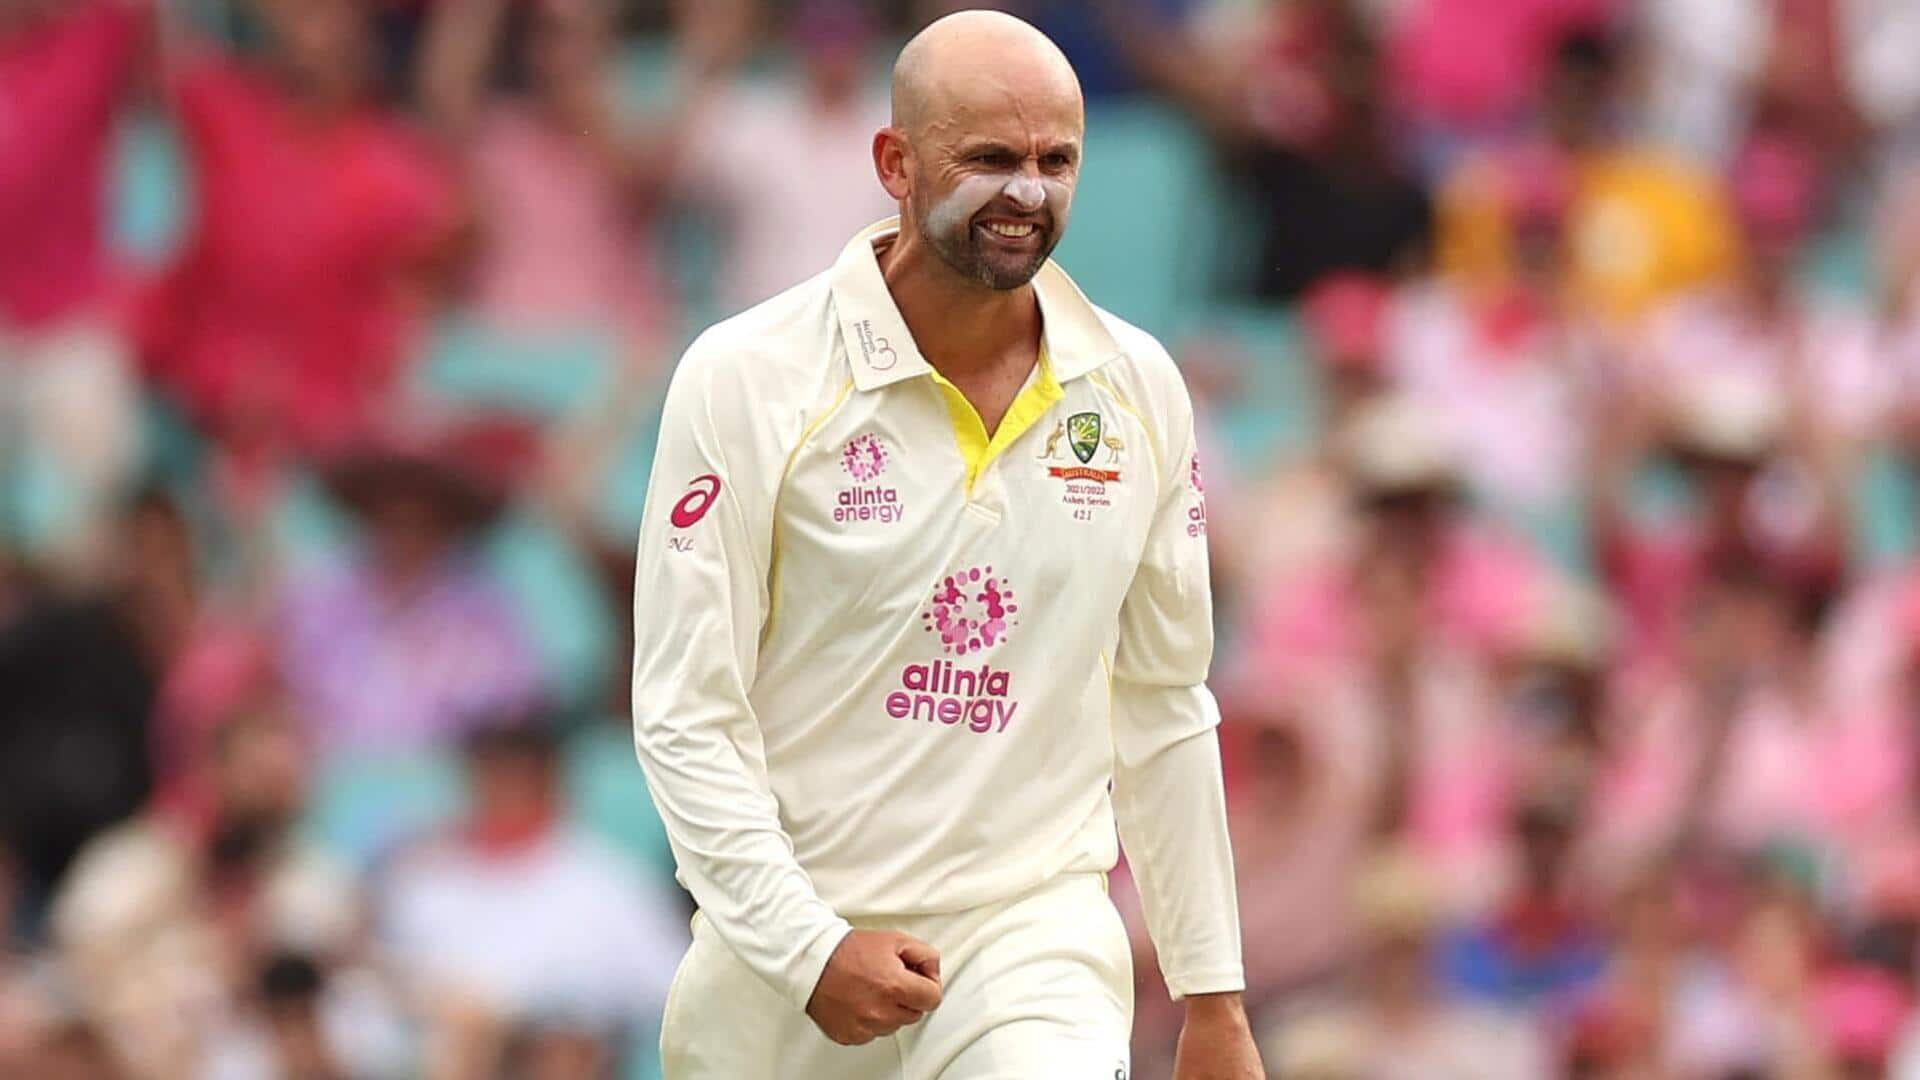 Tom Latham has struggled against Nathan Lyon in Tests: Stats